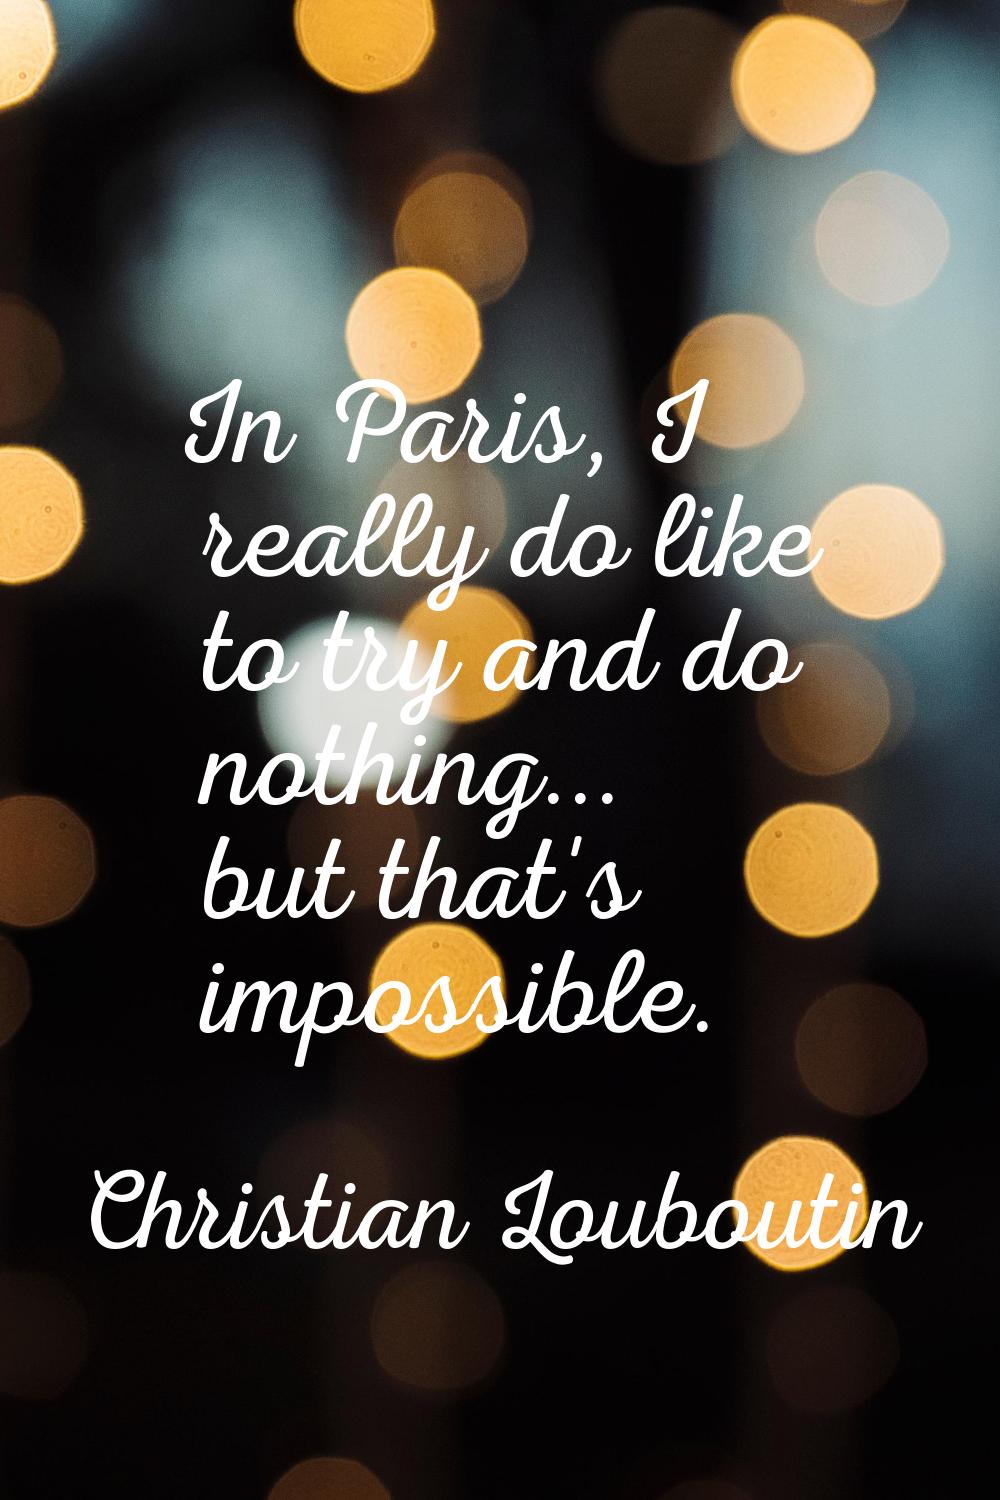 In Paris, I really do like to try and do nothing... but that's impossible.